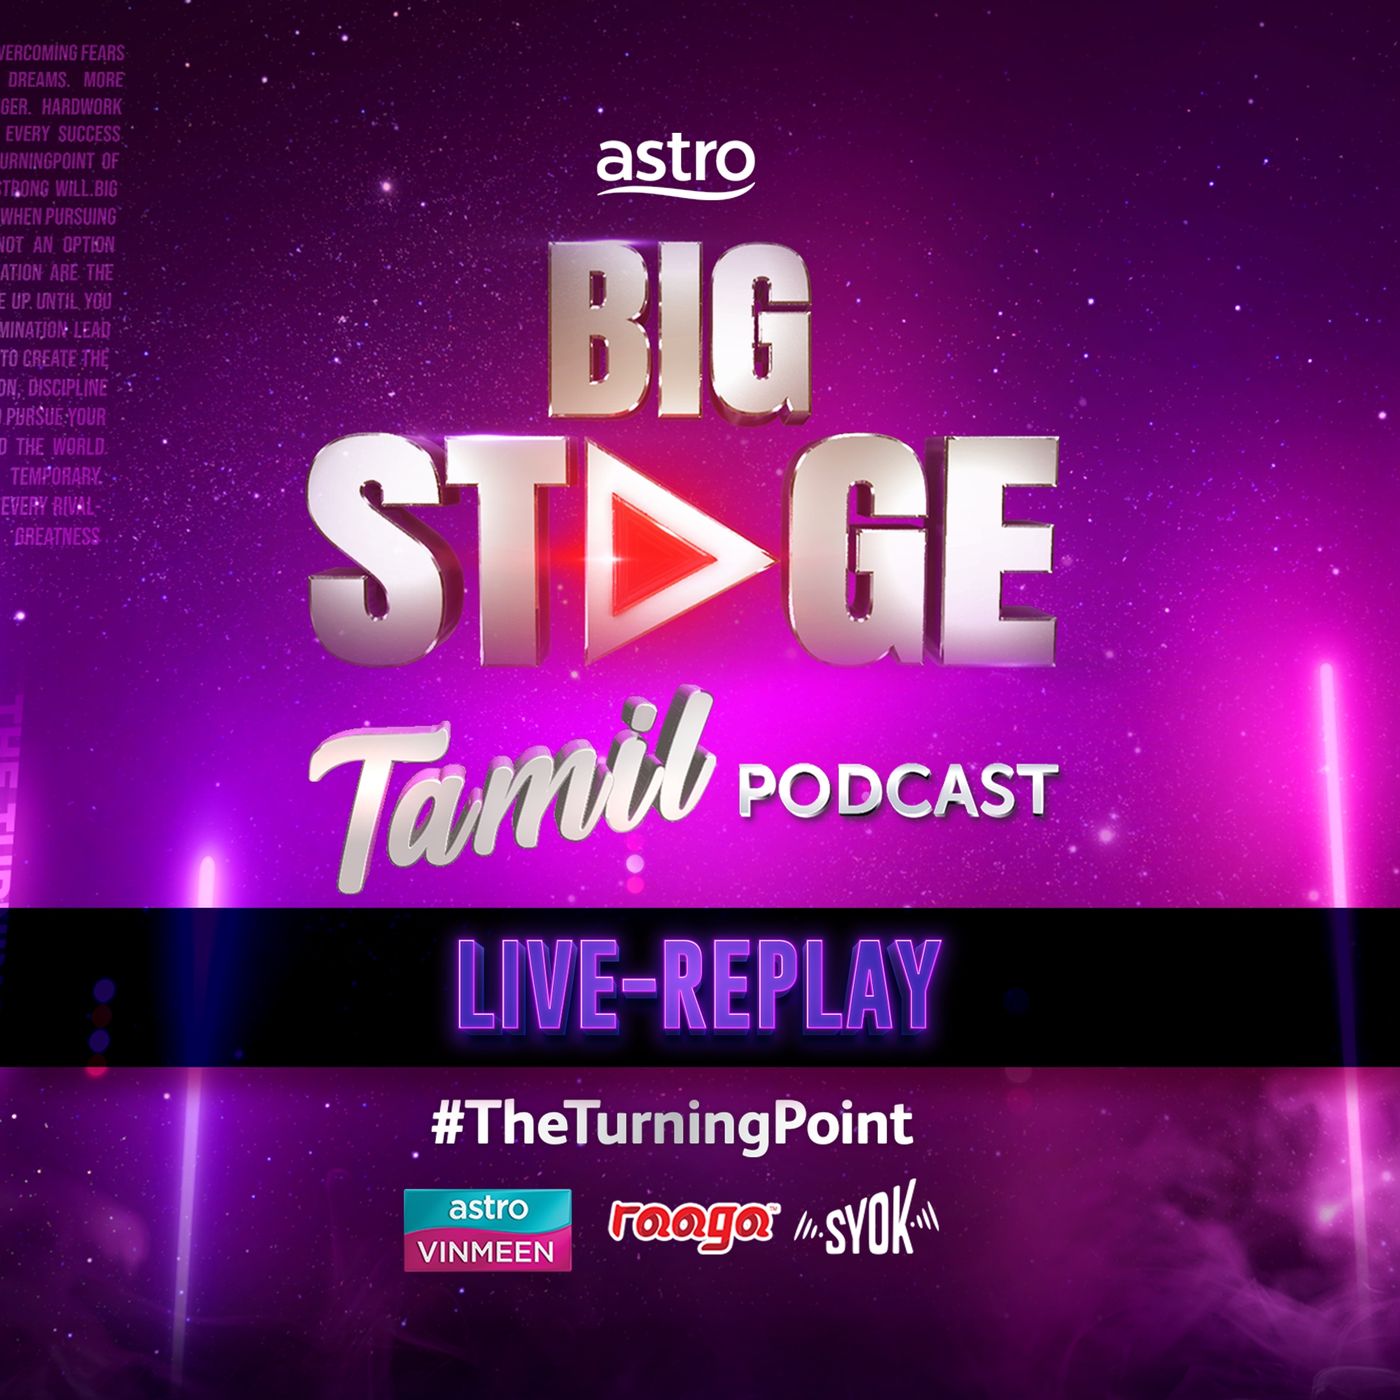 Big Stage Tamil Live - Replay